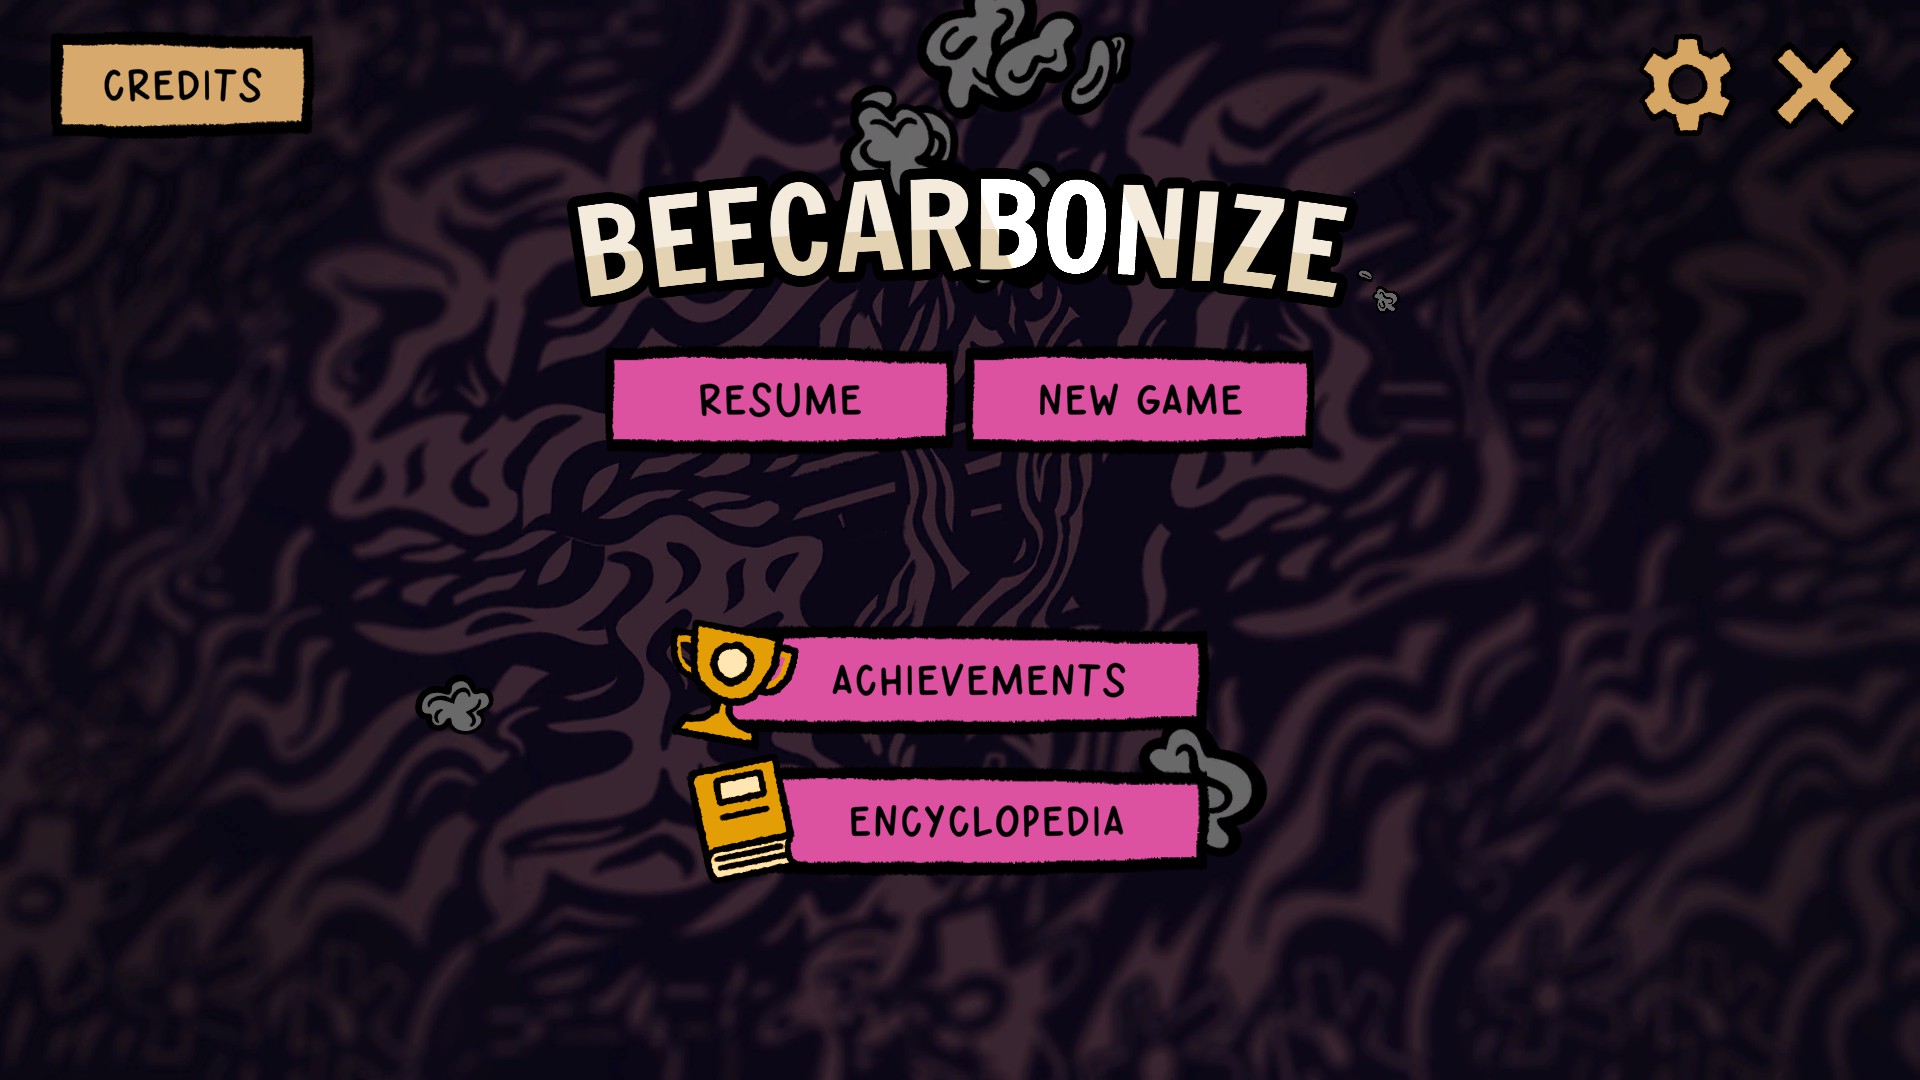 A screenshot showing the title menu of Beecarbonize, a video game.